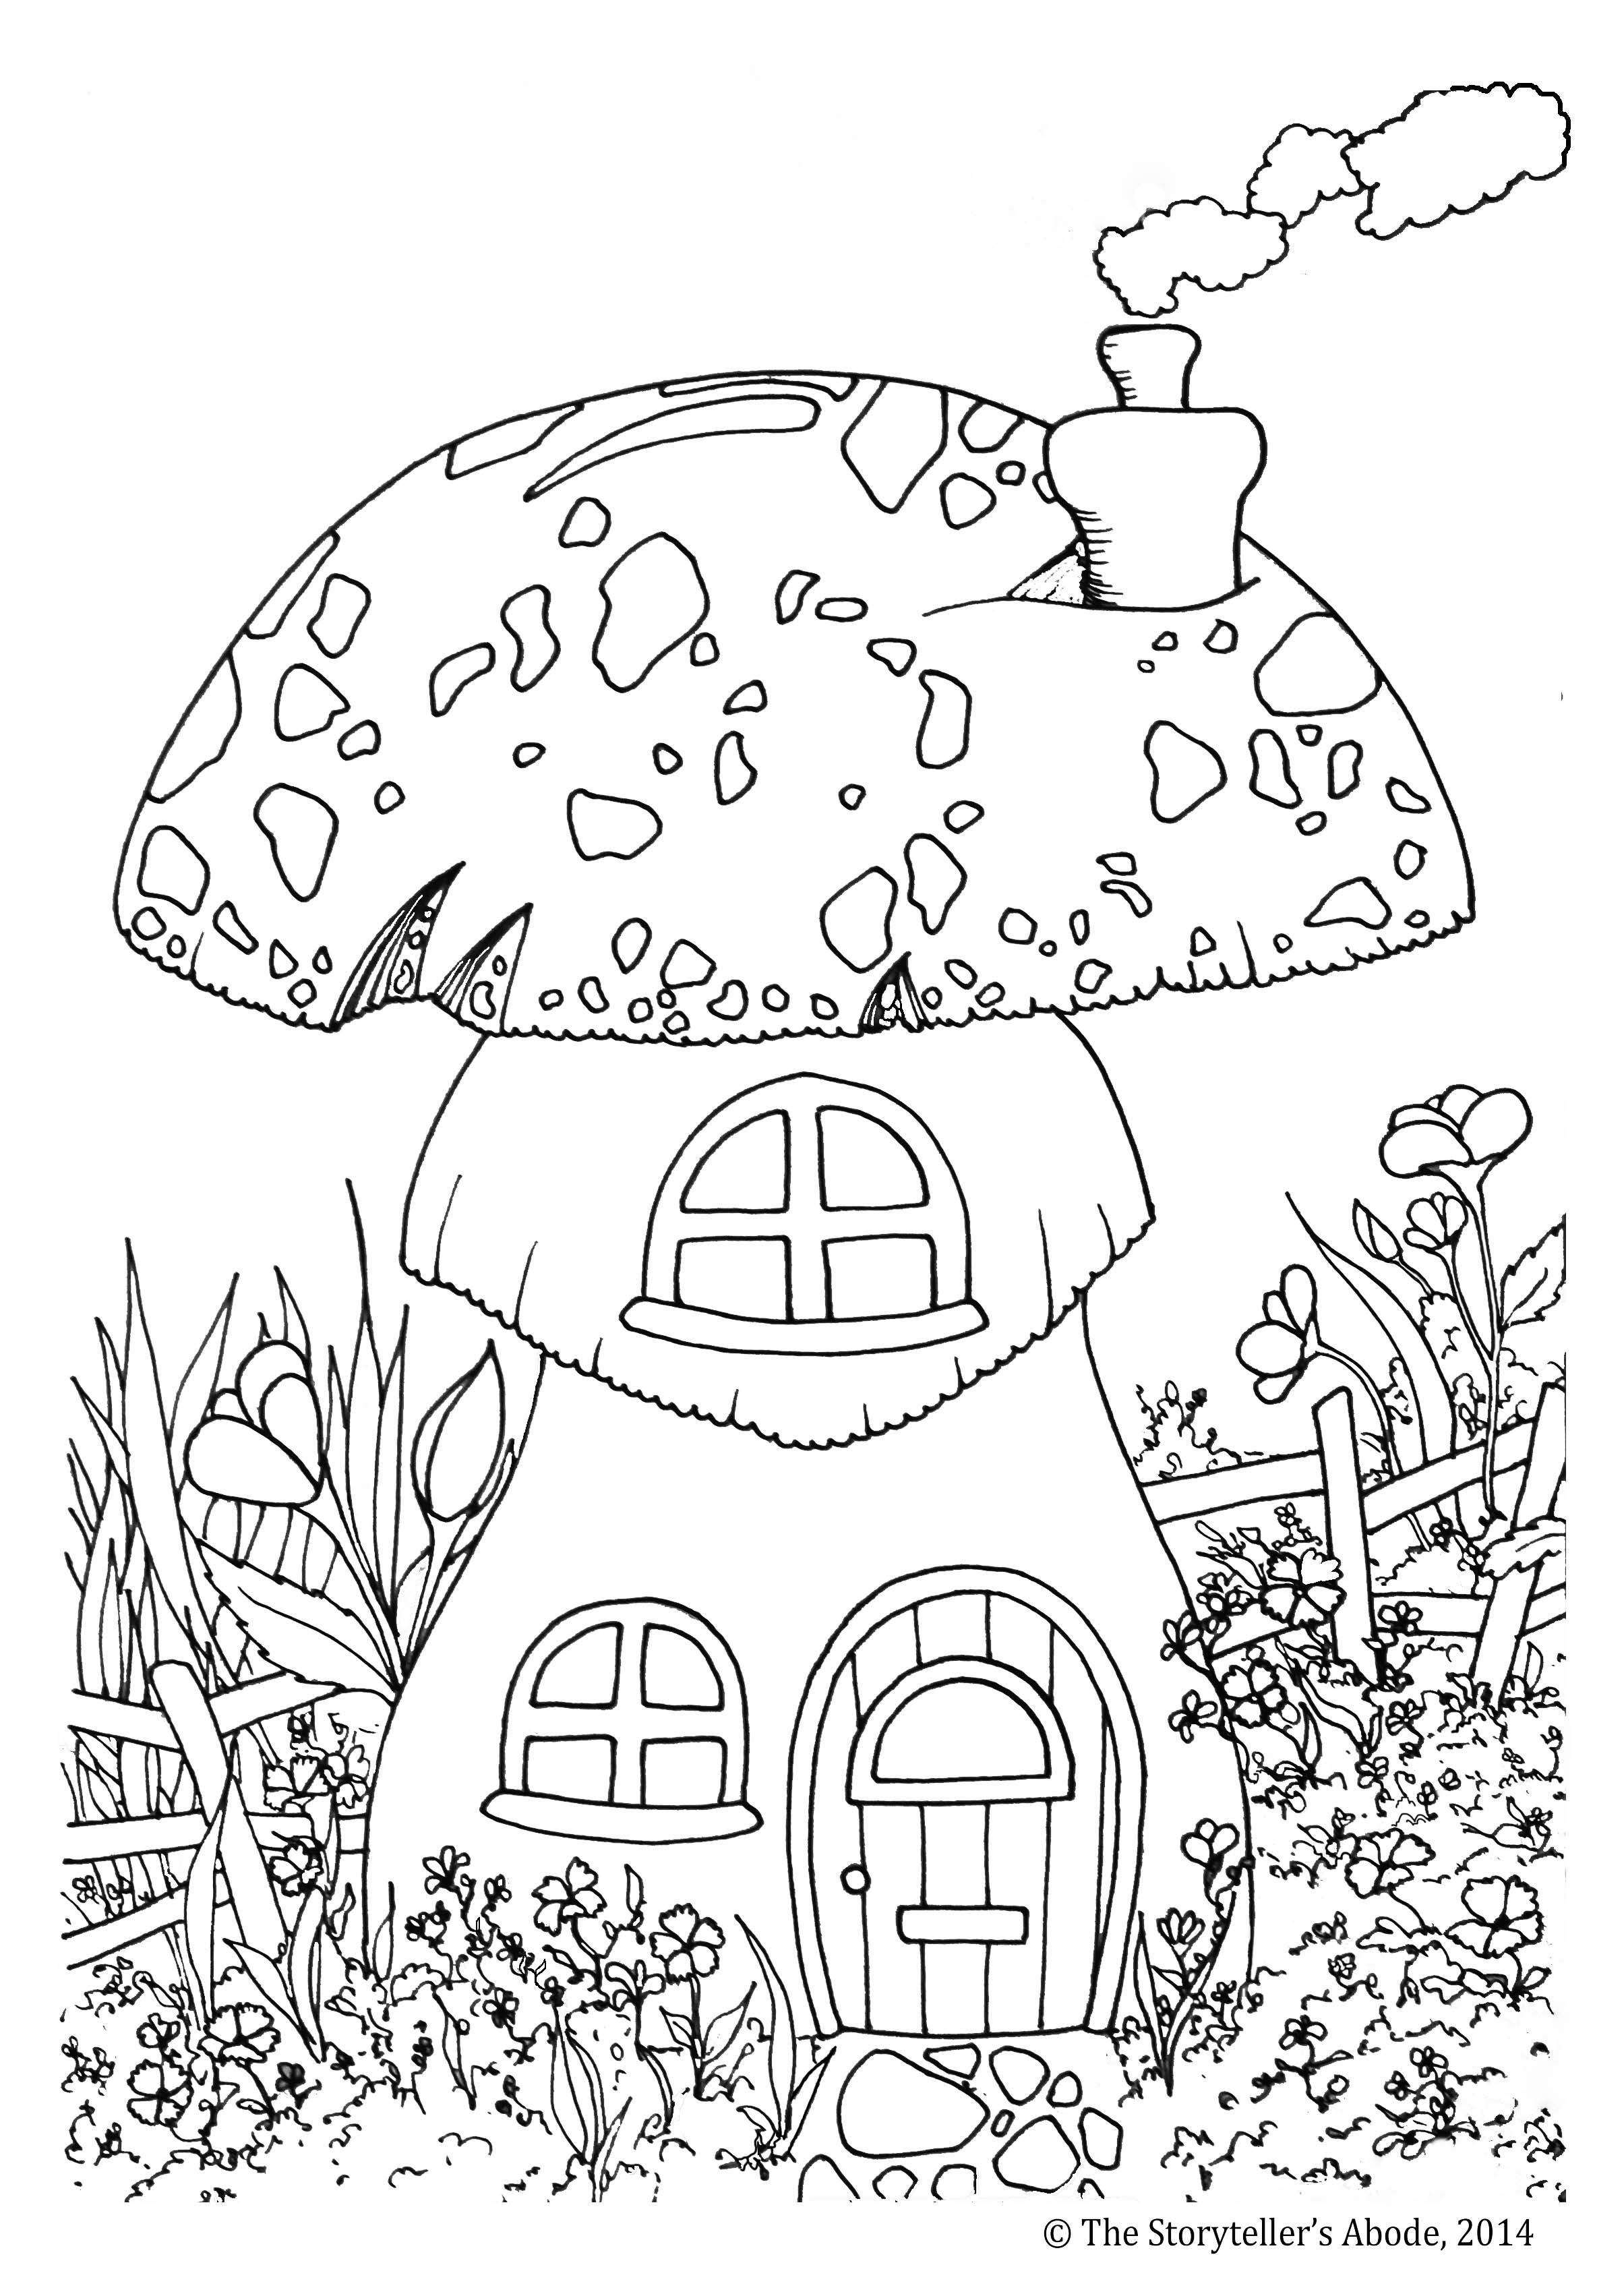 Forest Coloring Page For Children - Coloring Home